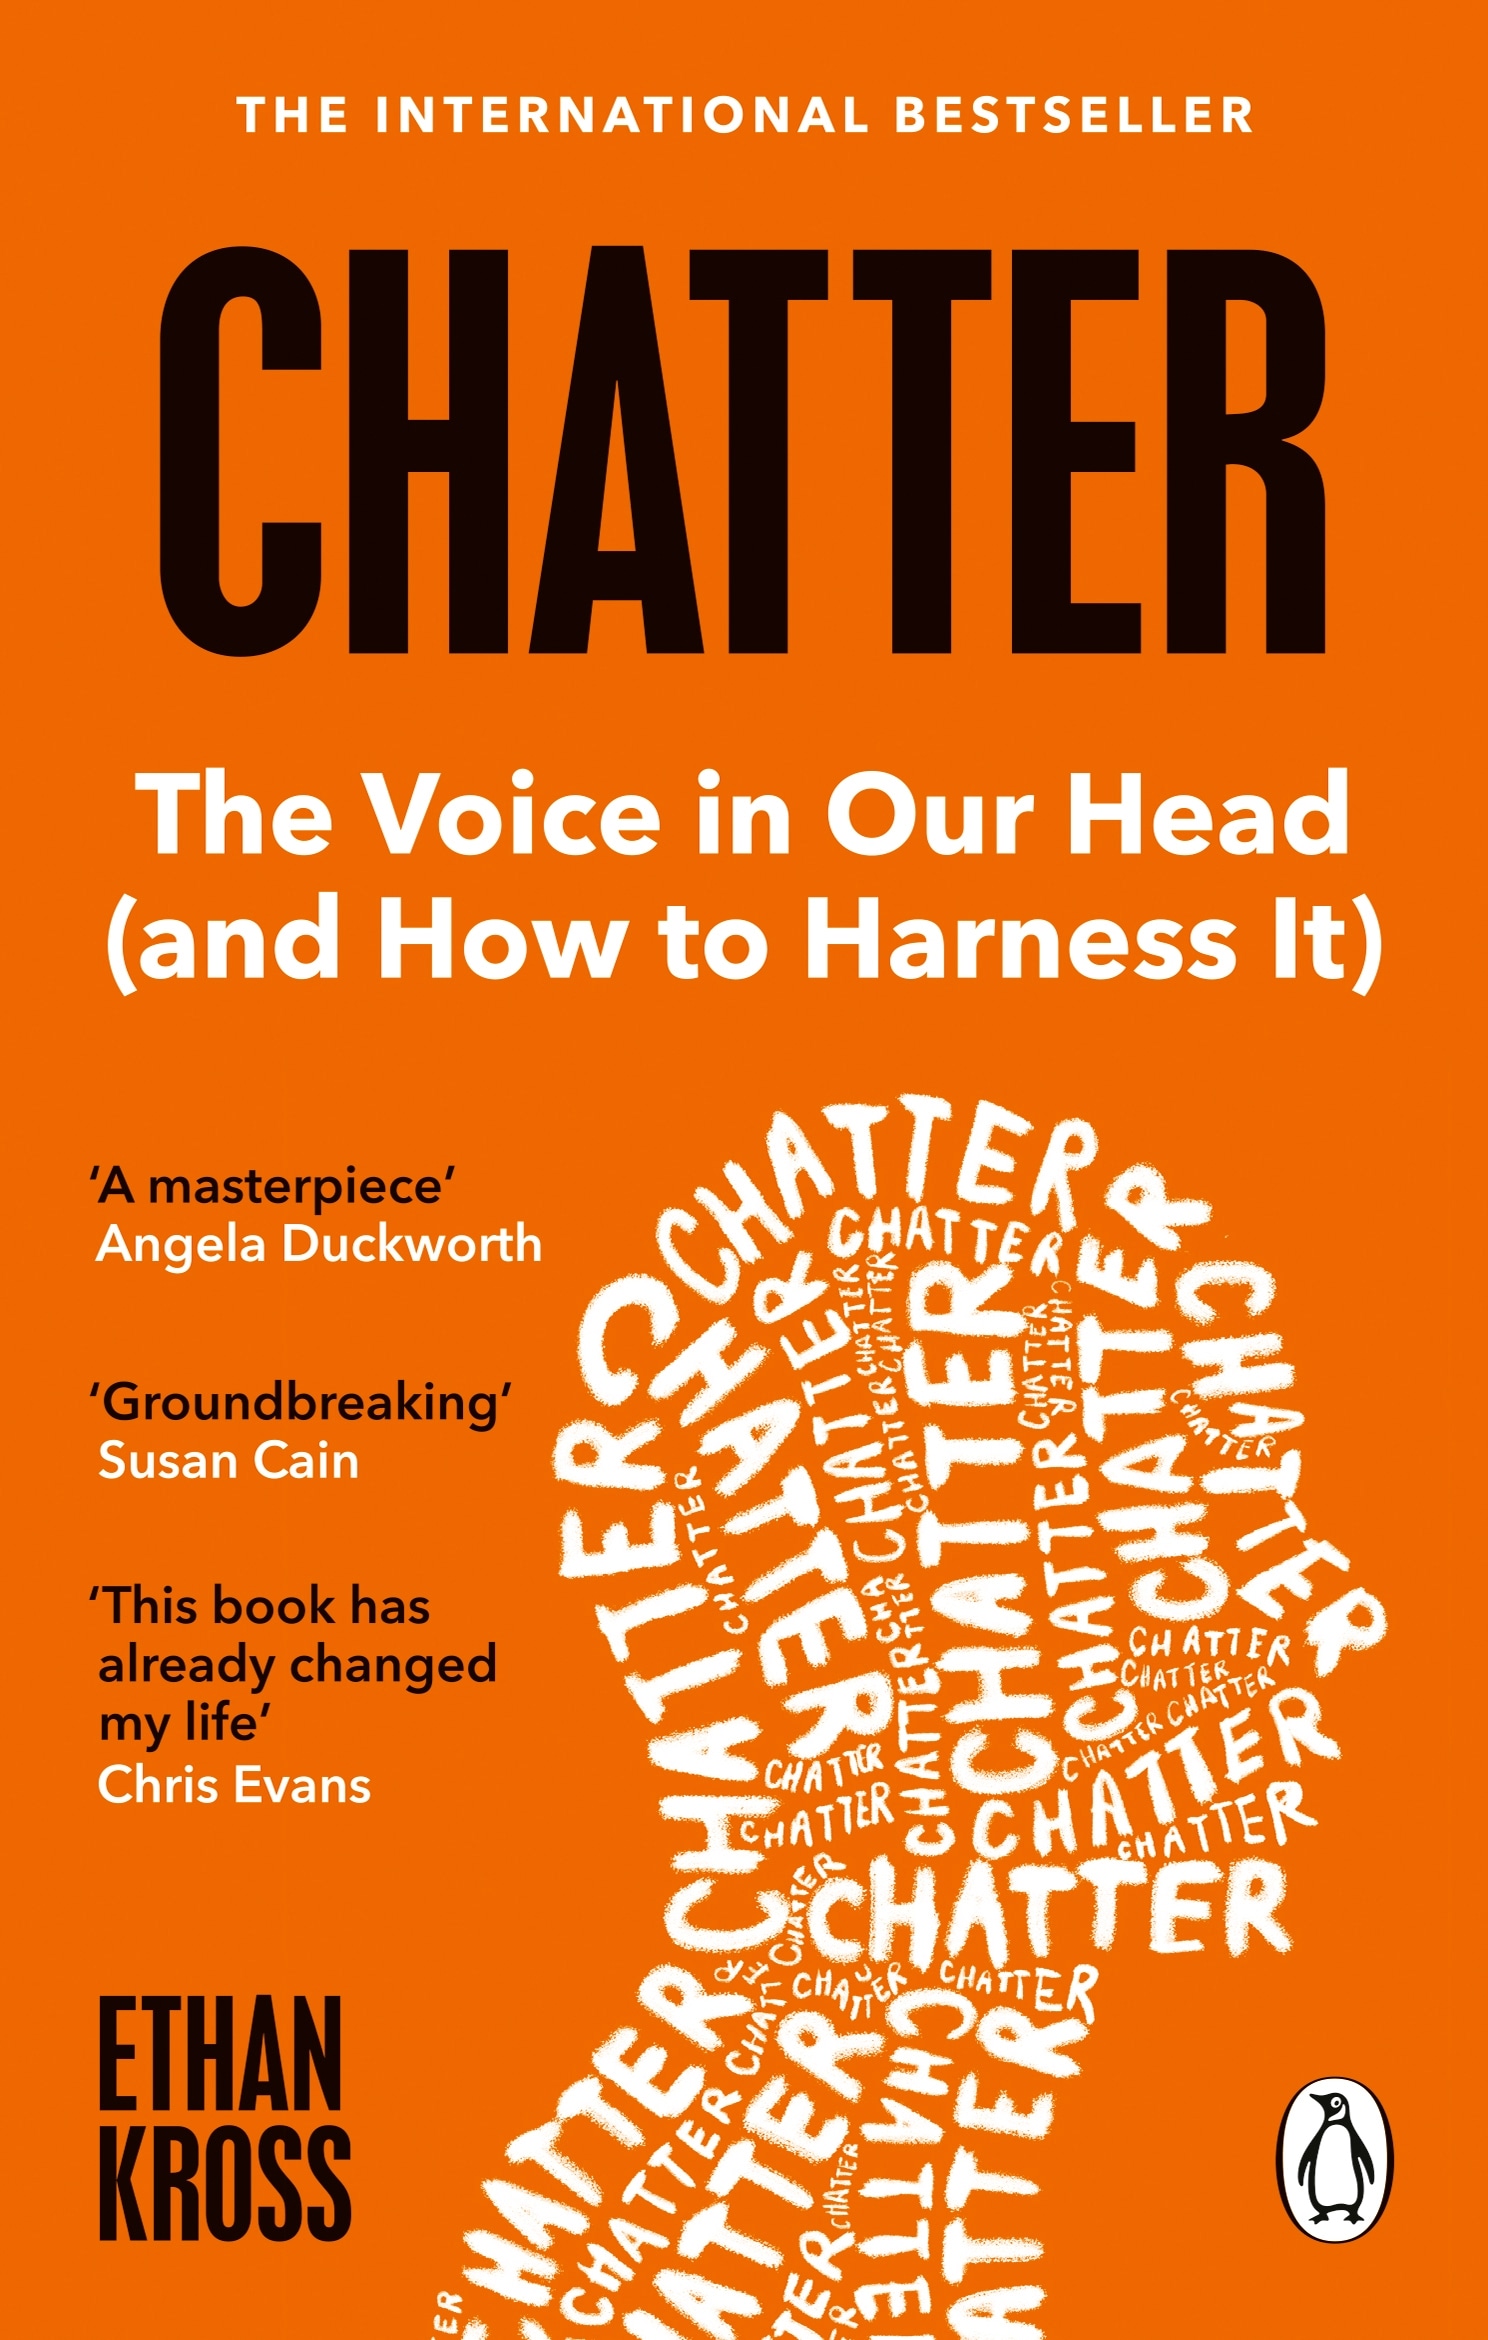 Book “Chatter” by Ethan Kross — February 1, 2022